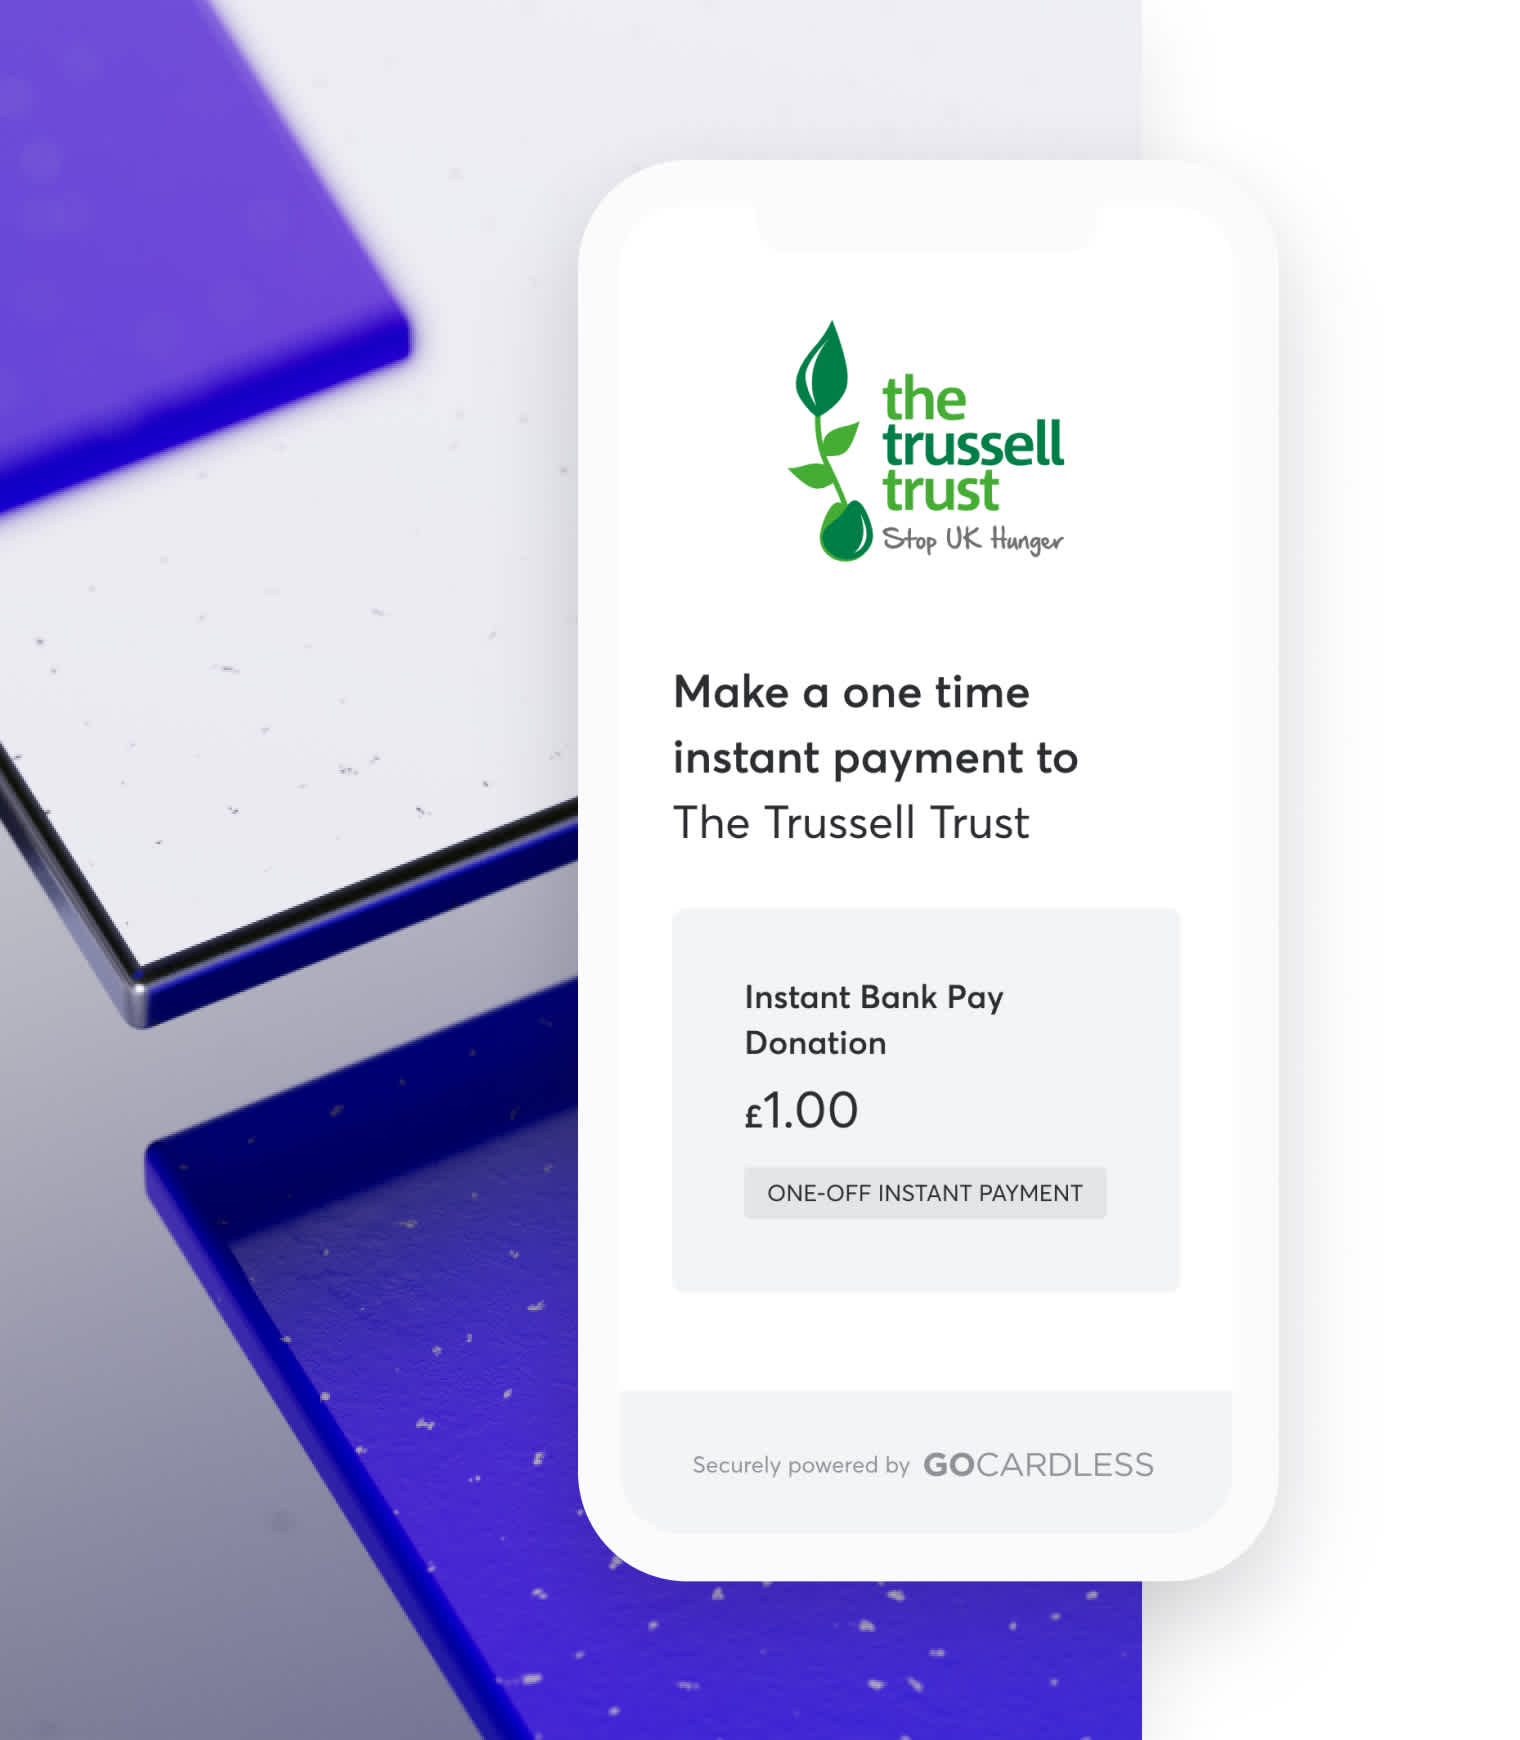 Try Instant Bank Pay by  donating to The Trussell Trust